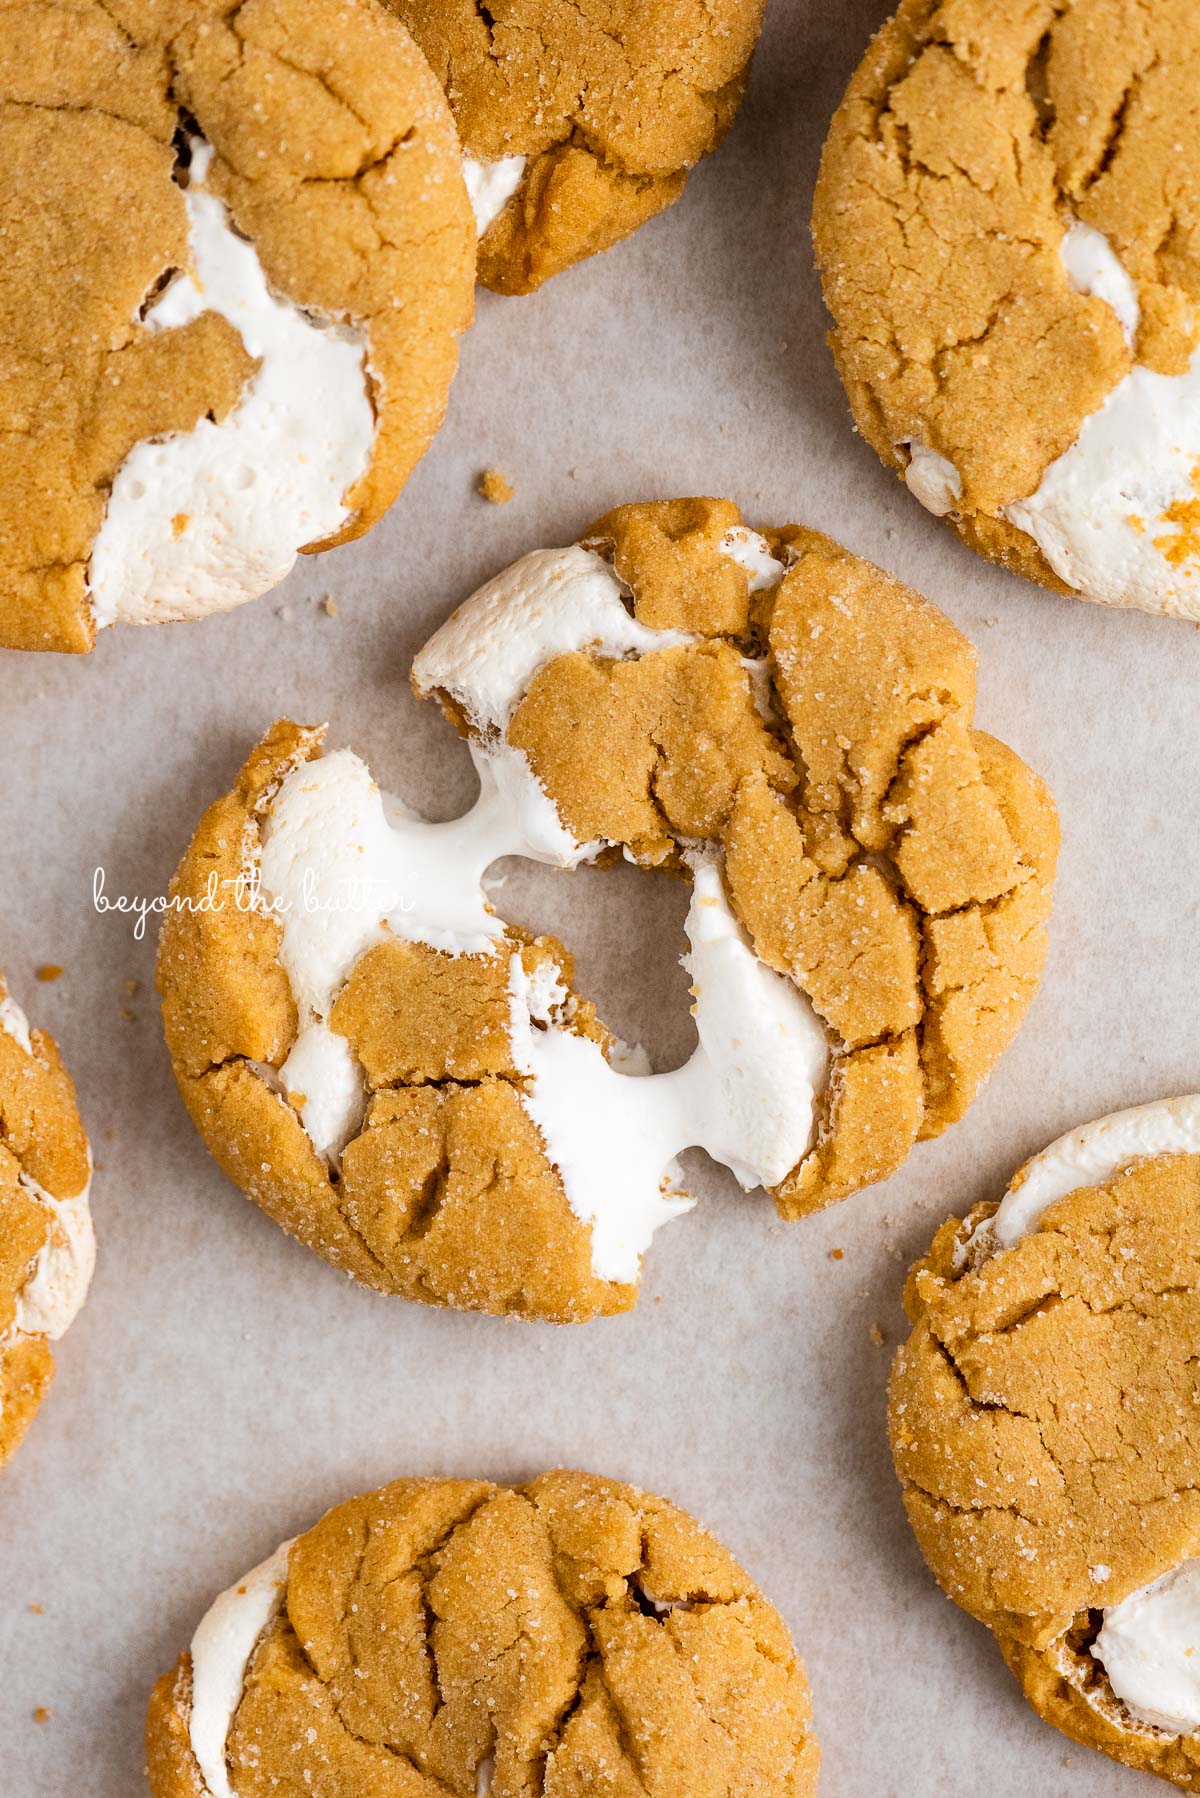 Fluffernutter cookie split in half with melted marshmallow in between on white parchment paper background.